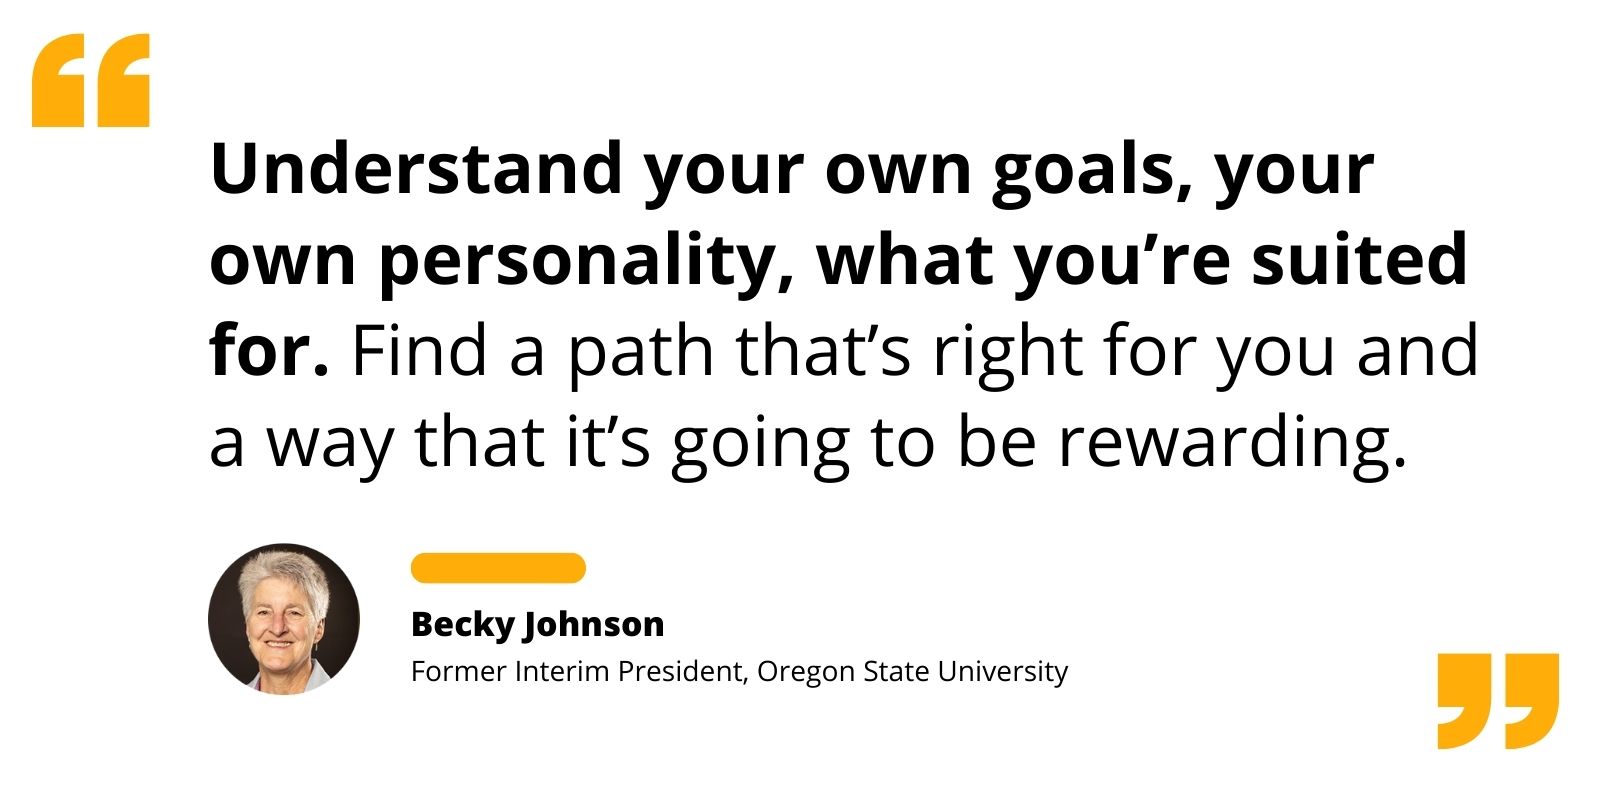 Quote by Becky Johnson re: finding the right leadership path to best match your goals and personality.